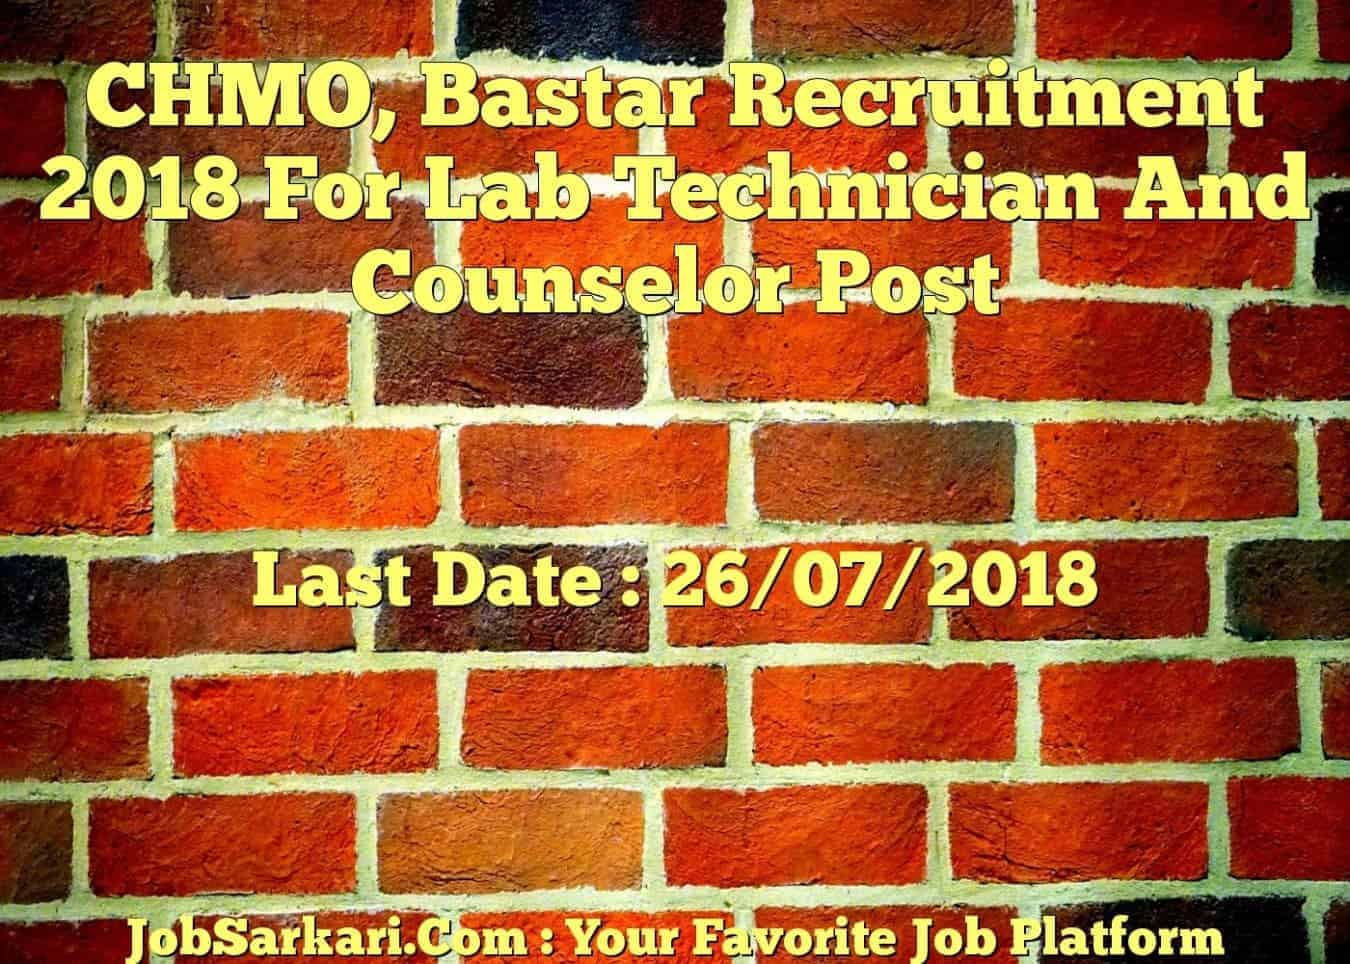 CHMO, Bastar Recruitment 2018 For Lab Technician And Counselor Post